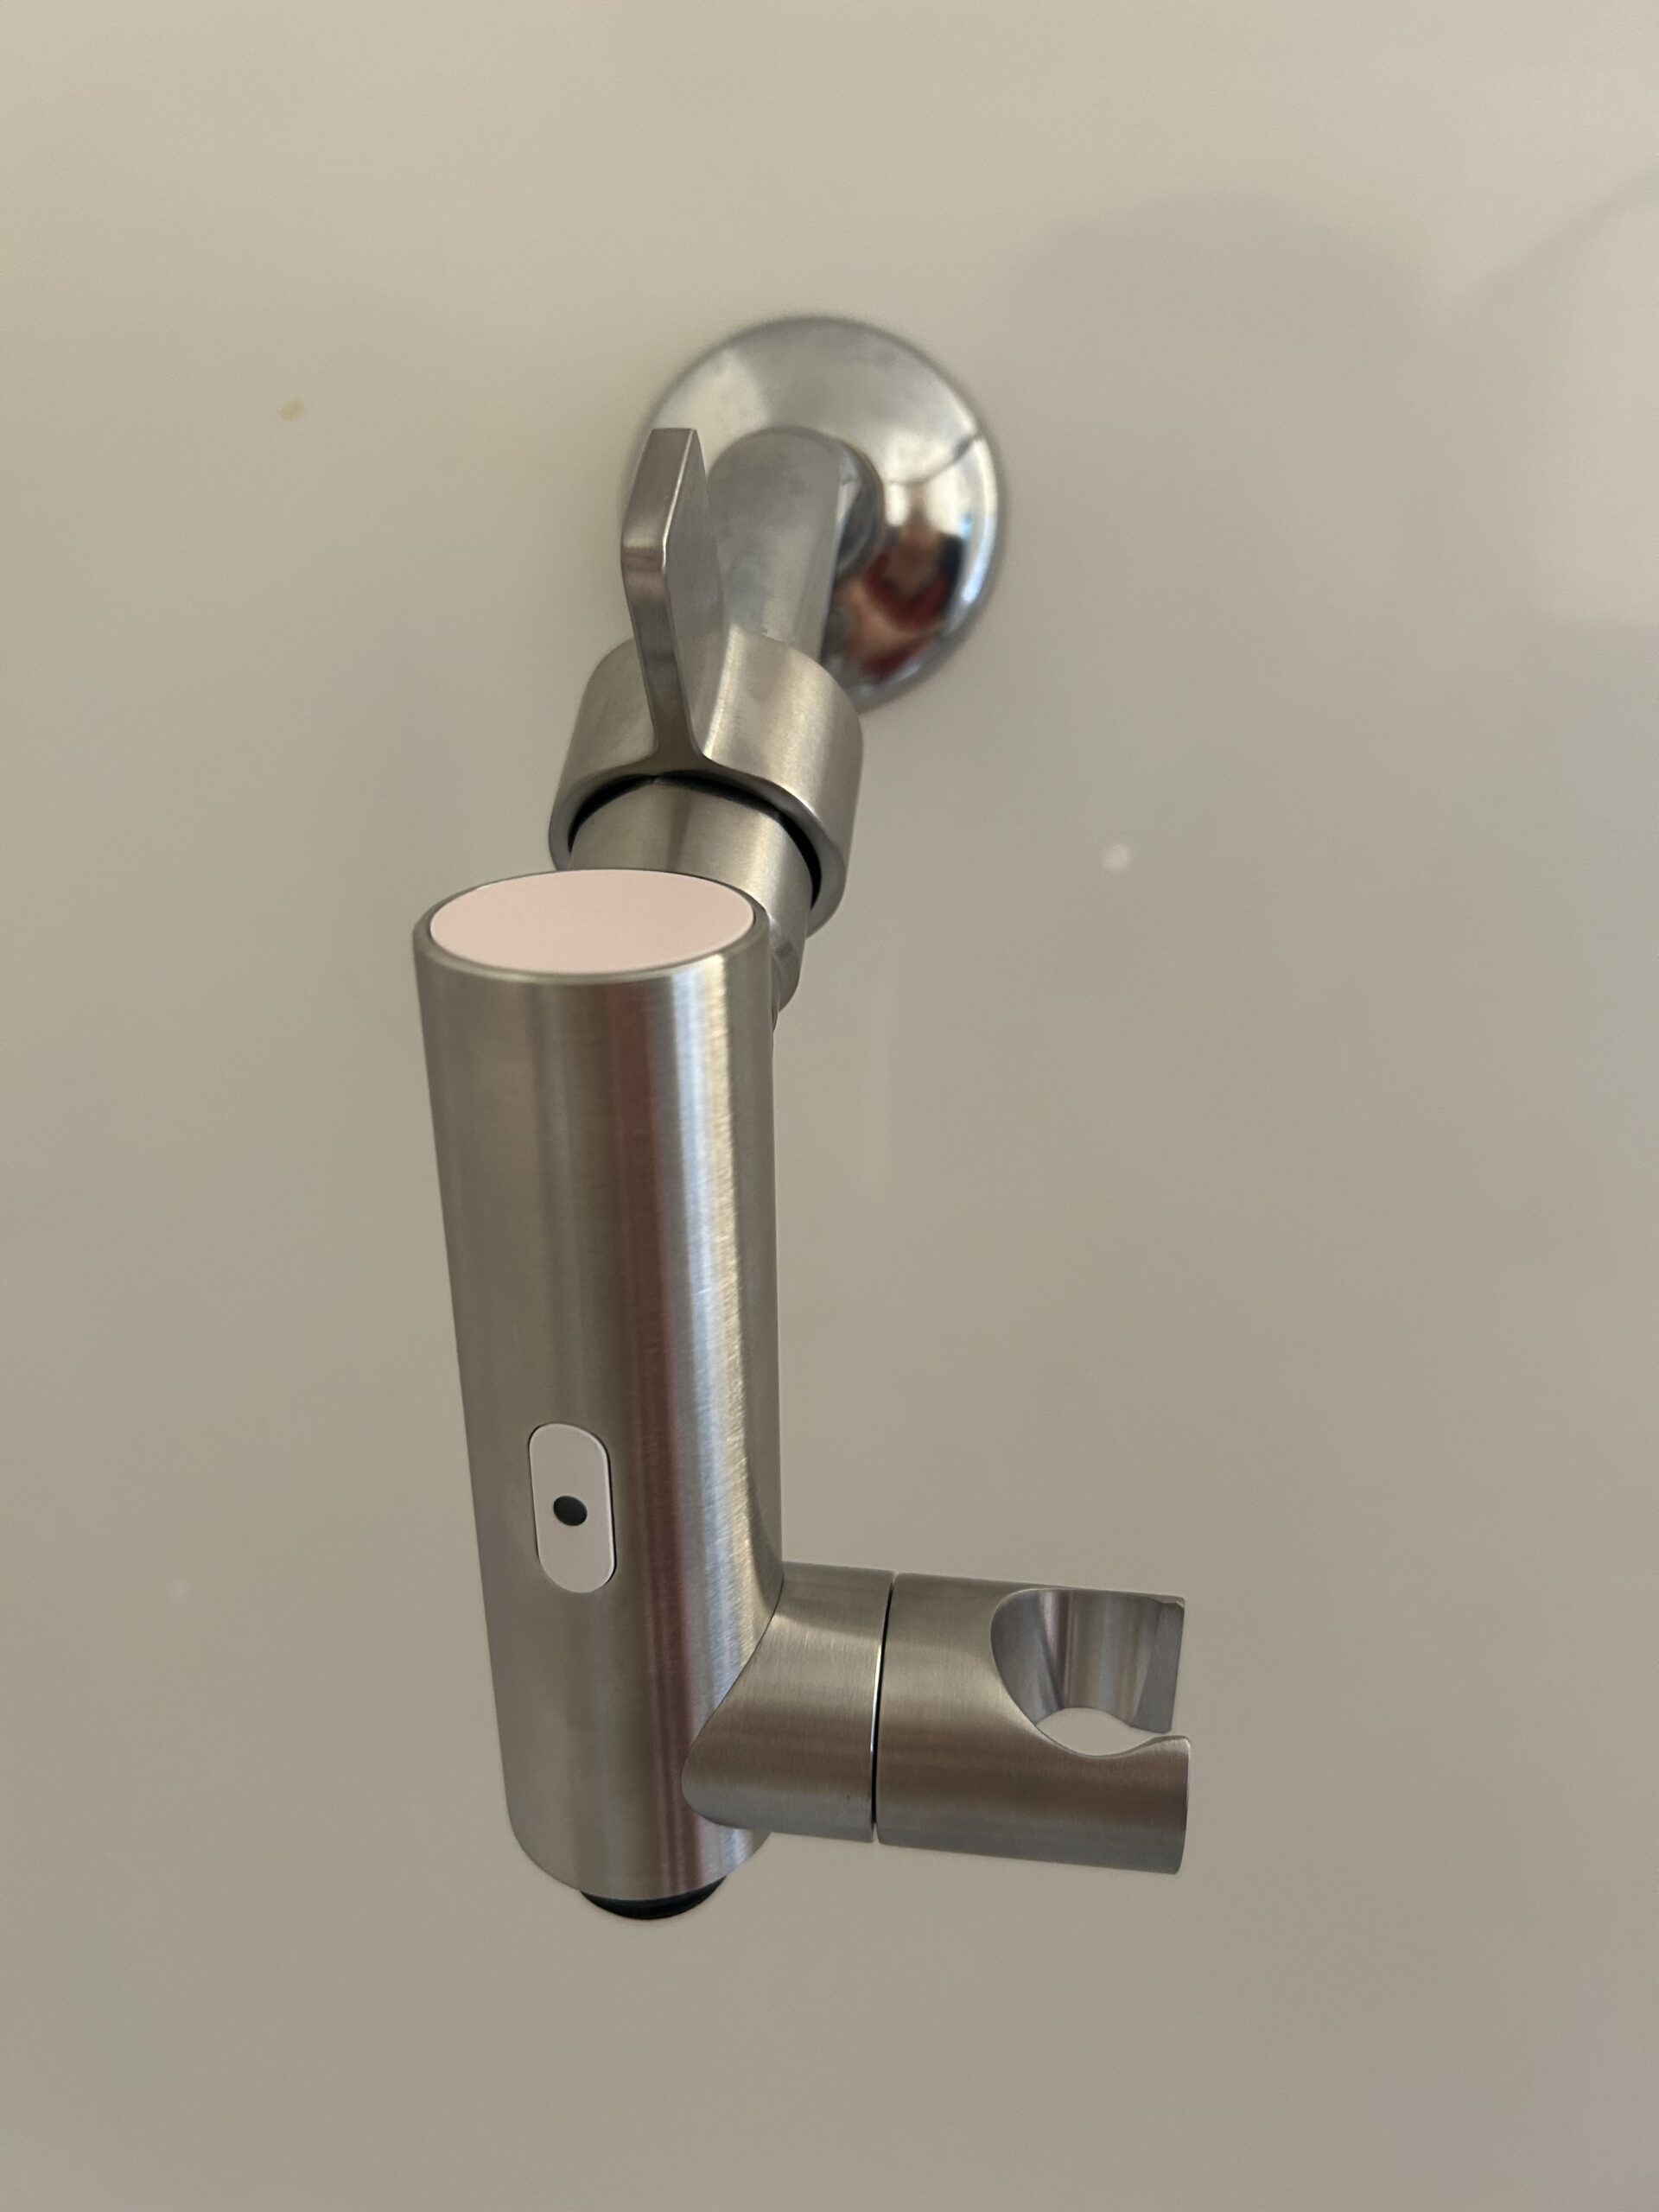 A stainless steel faucet with a handle on it.